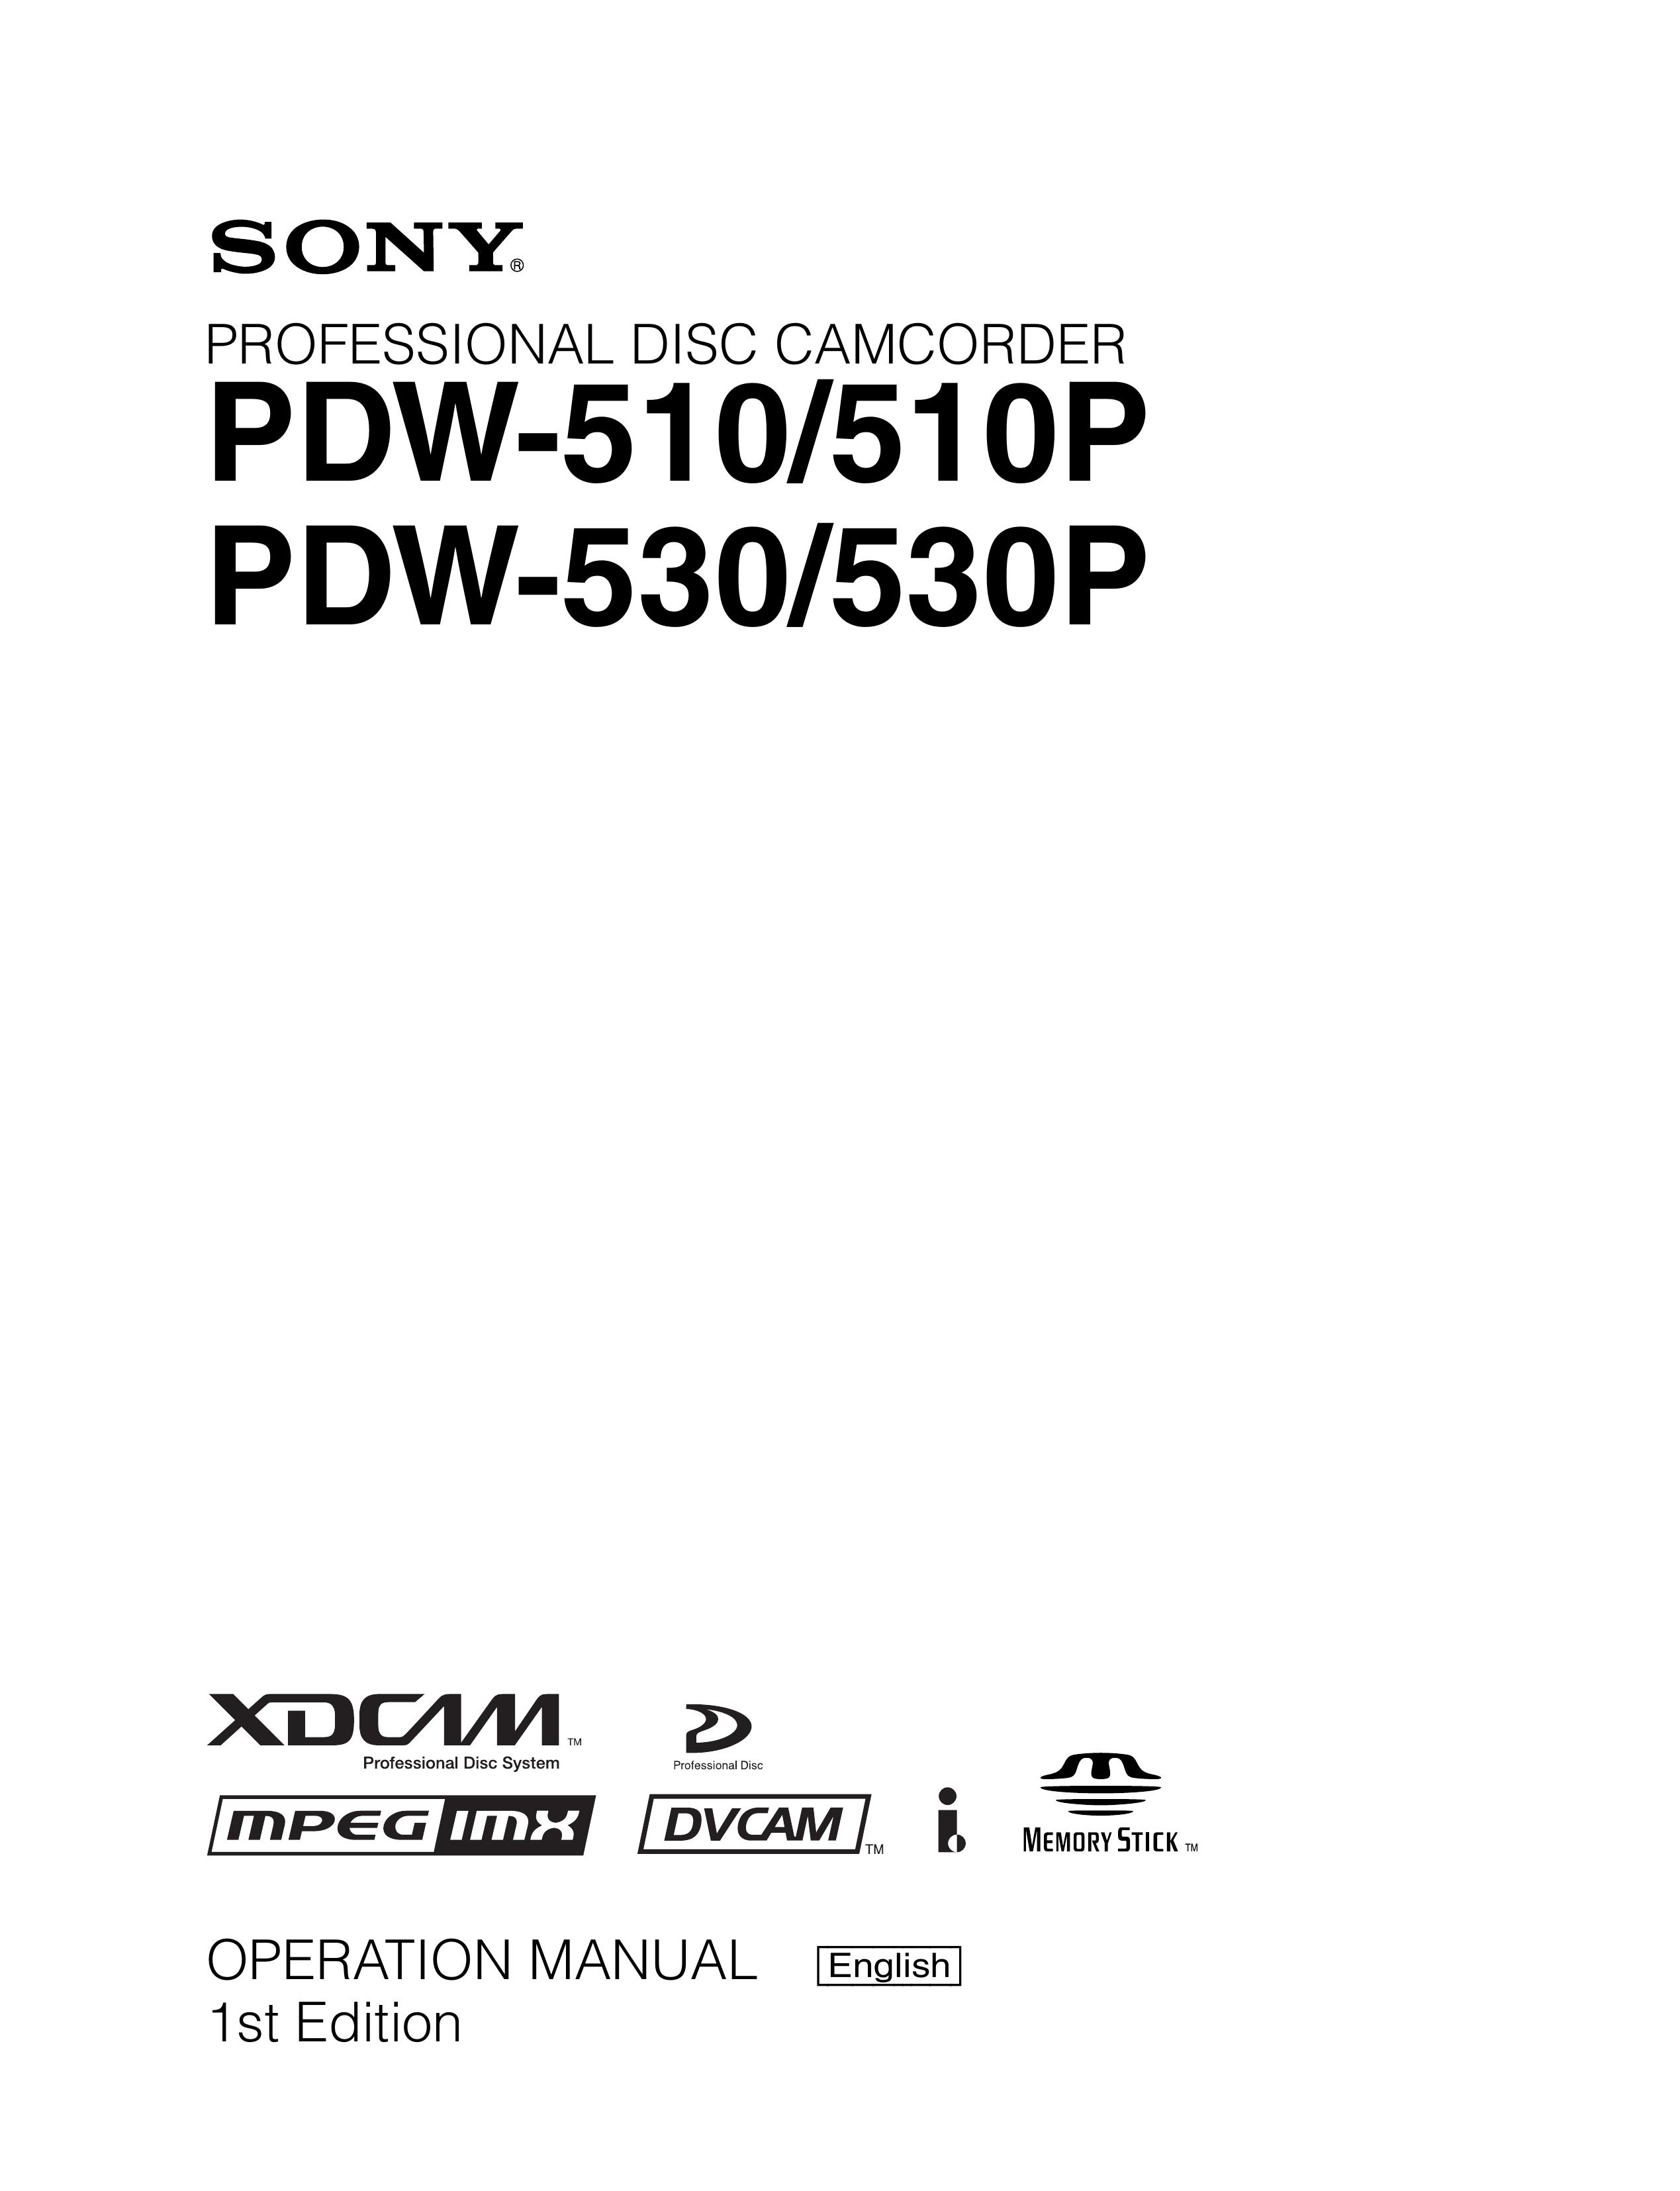 Sony Ericsson PDW-530P Camcorder User Manual